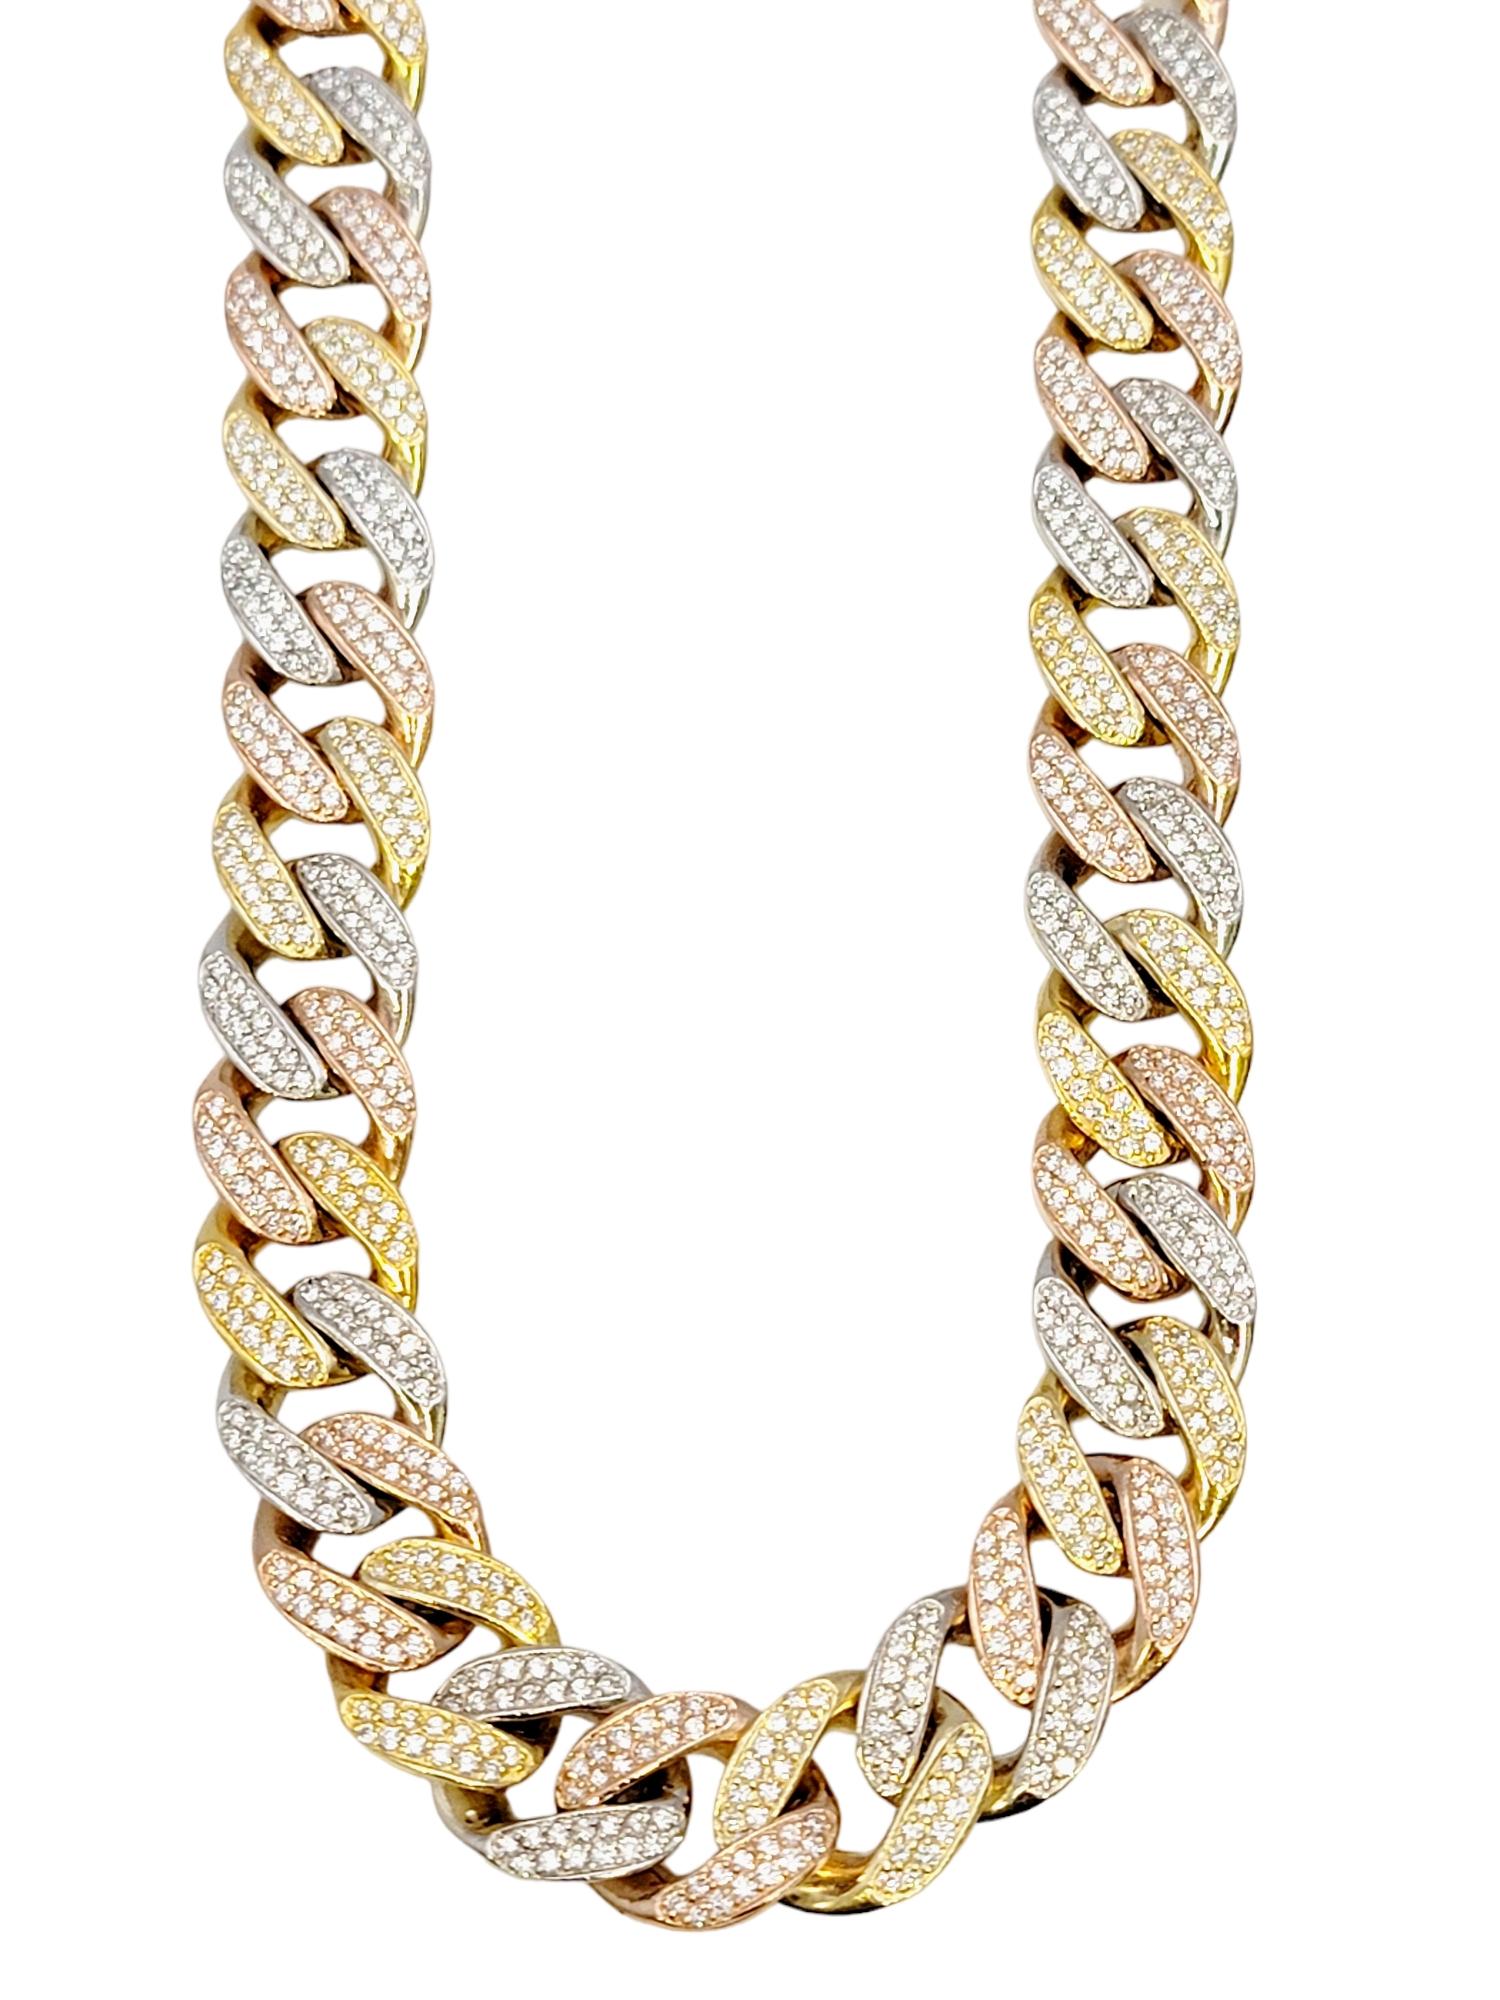 Impressive unisex cuban link necklace with glittering pave diamonds. The wide, tri-toned links hug the neck for a comfortable and secure fit, while the shimmering diamonds sparkle from all angles. 

This striking necklace features chunky cuban links